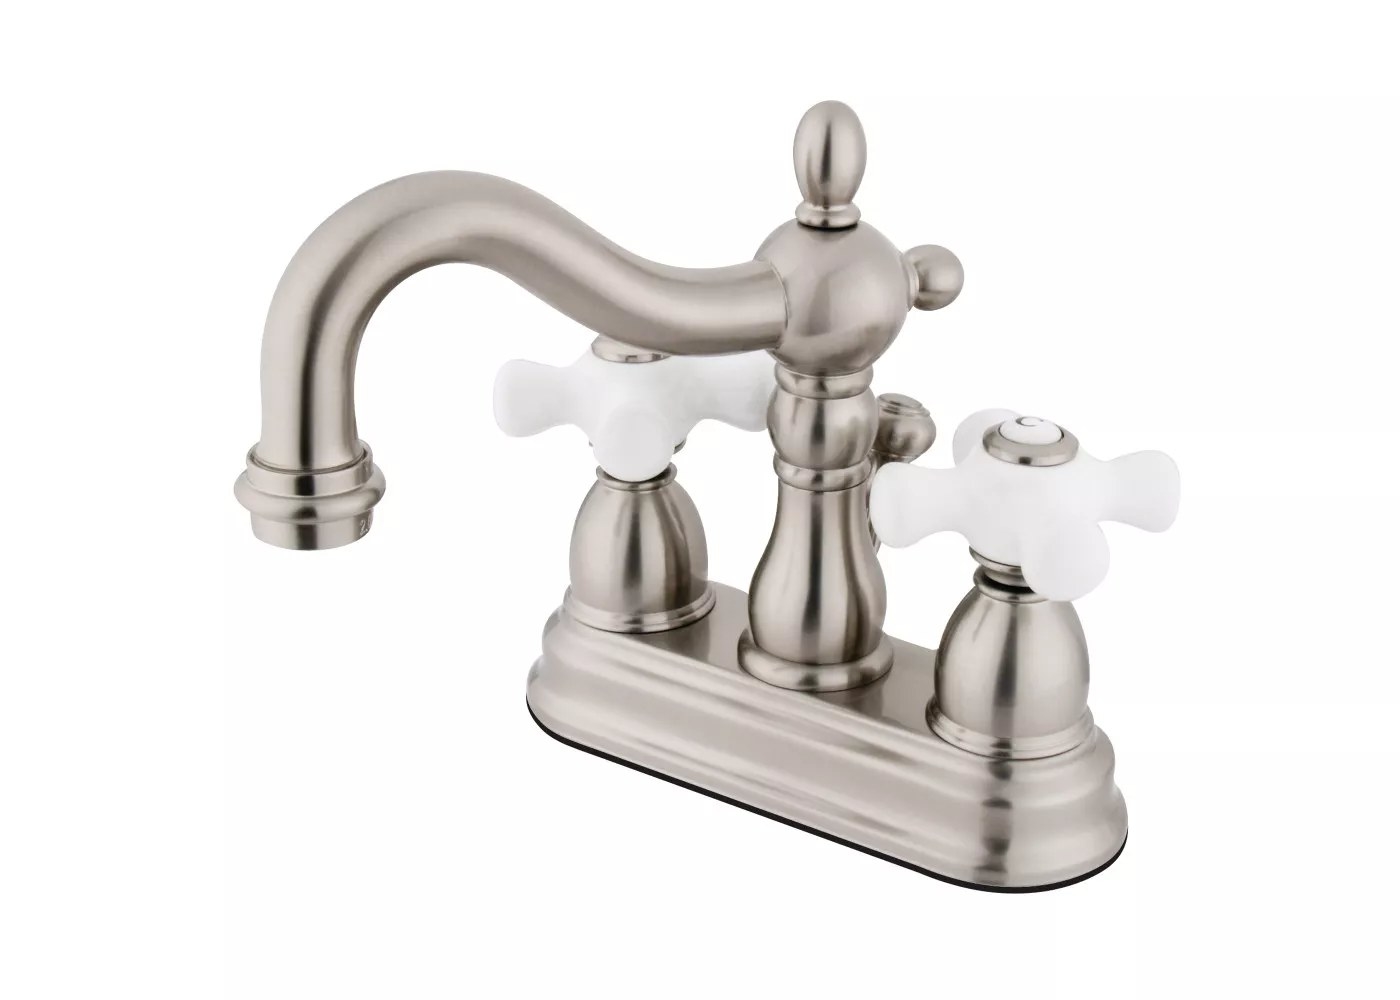 The brushed nickel cross faucet